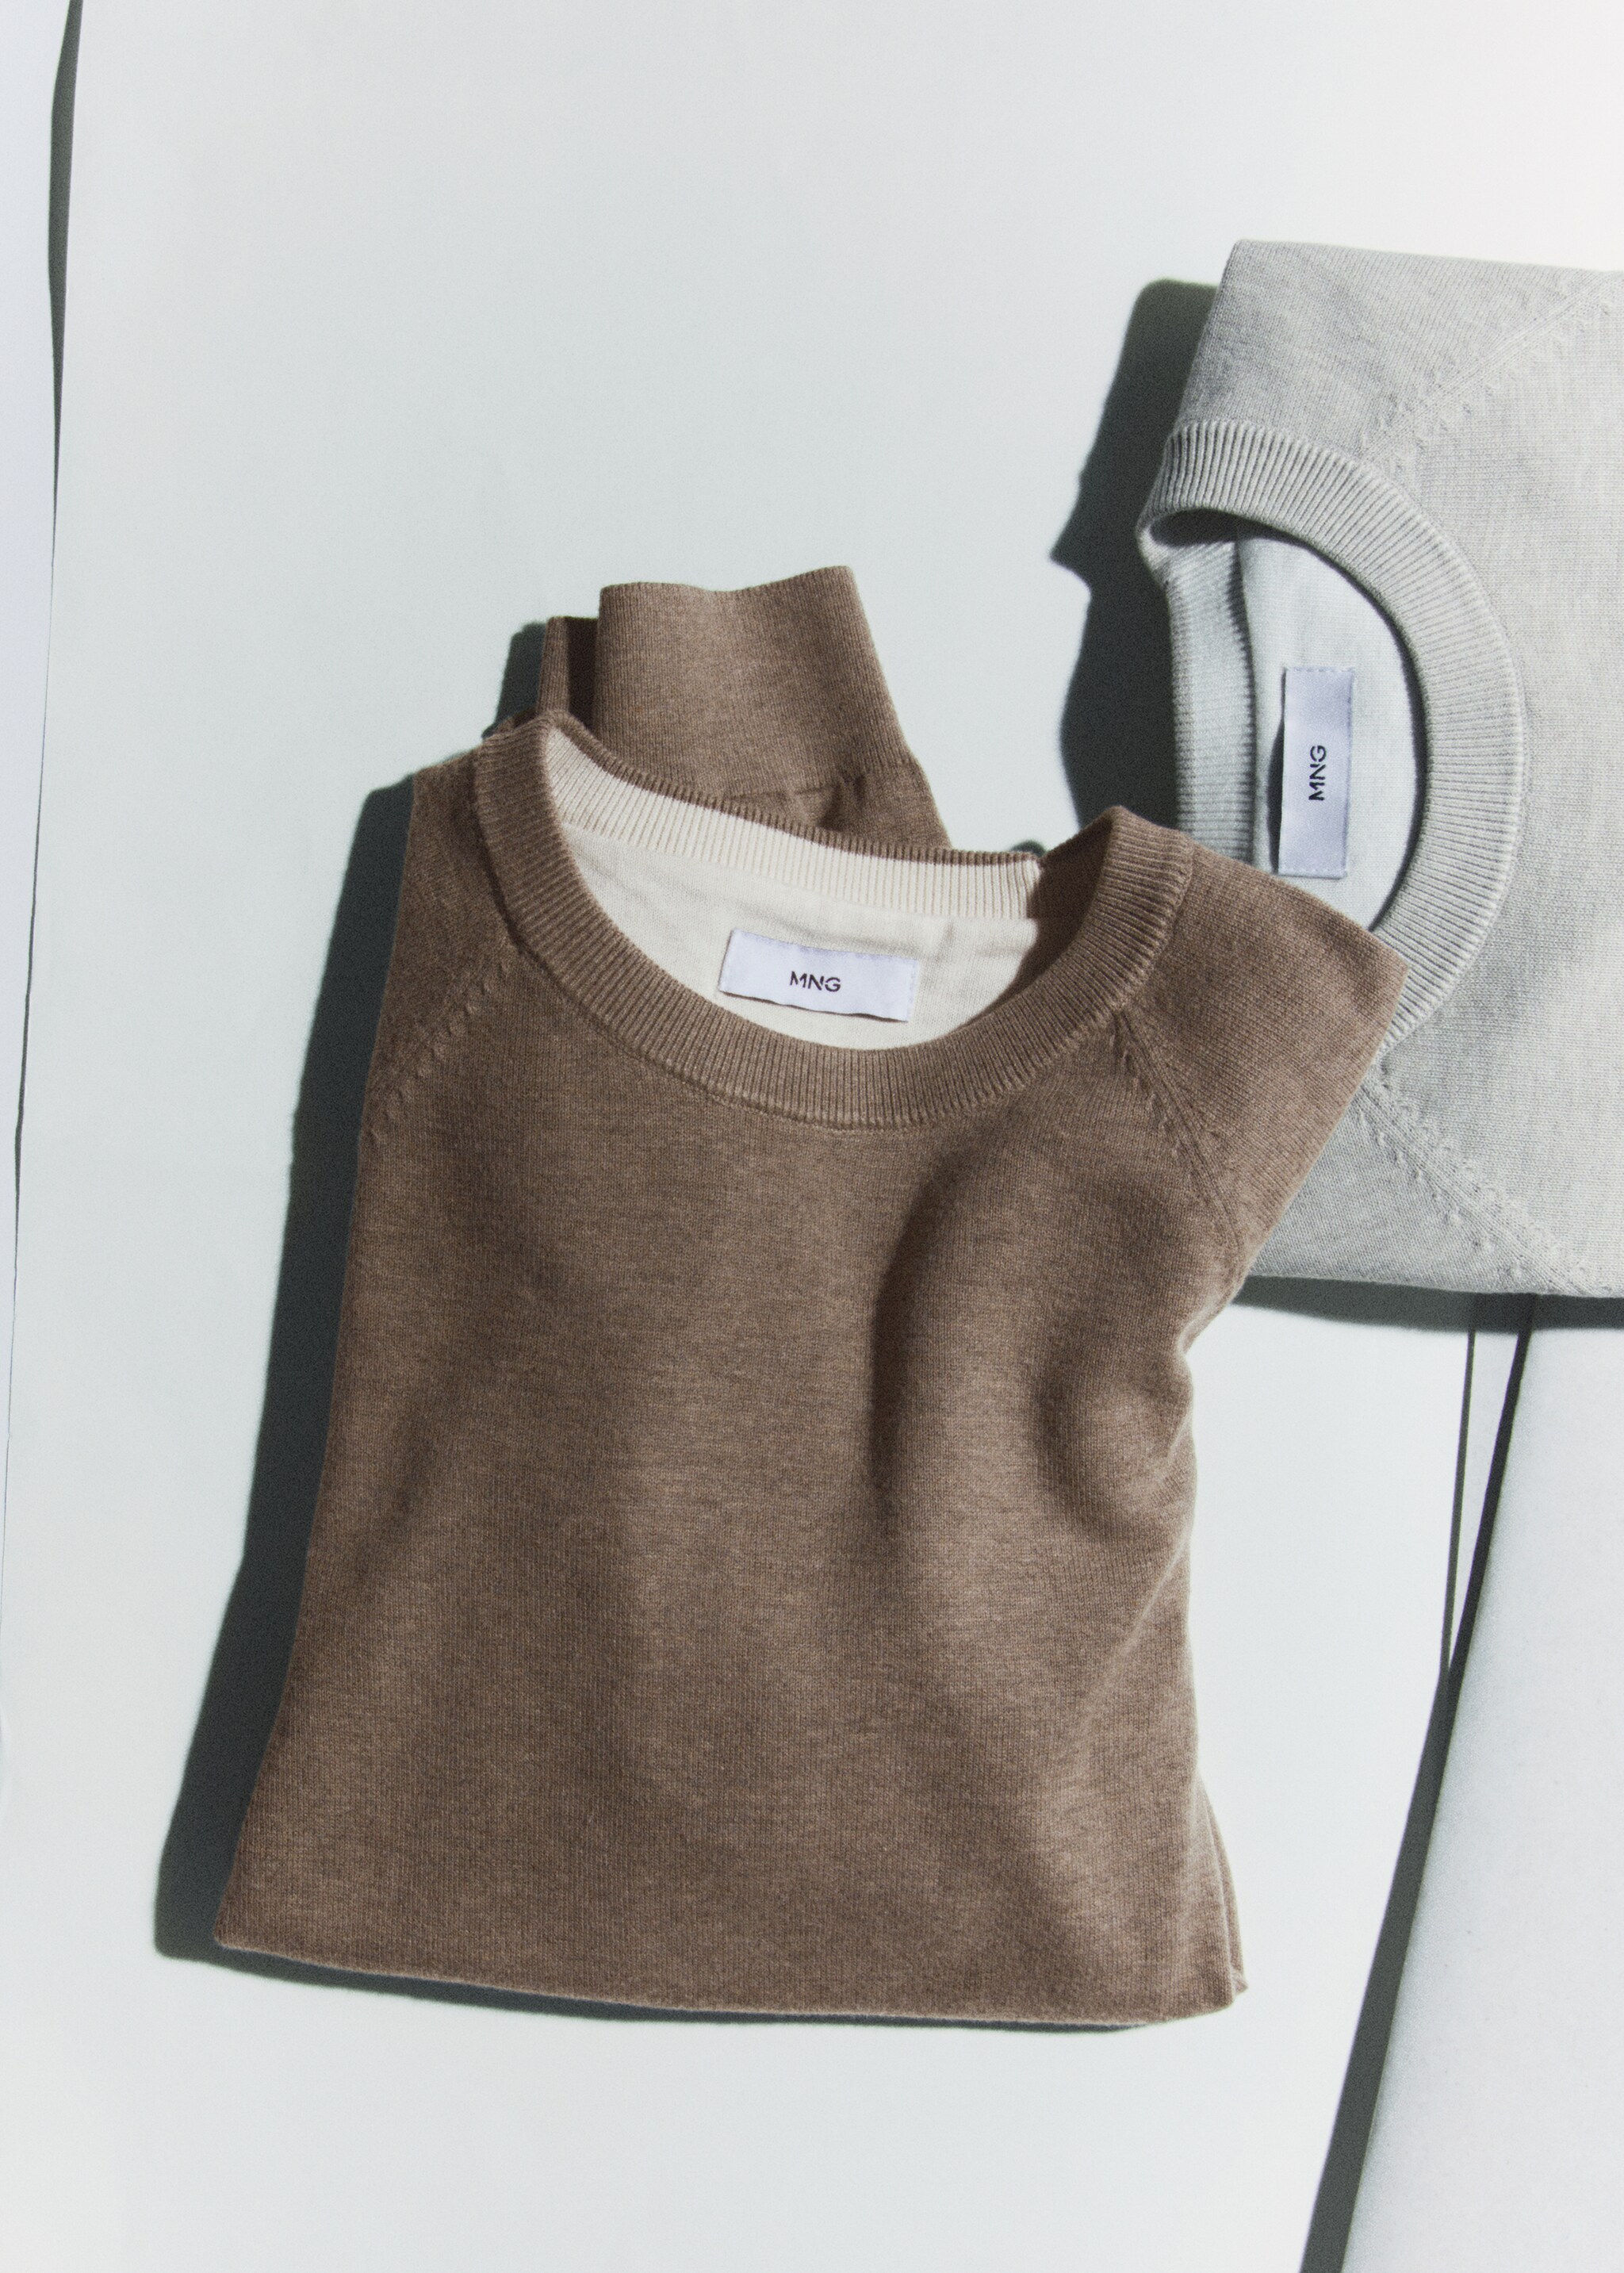 Fine-knit cotton sweater - Details of the article 5